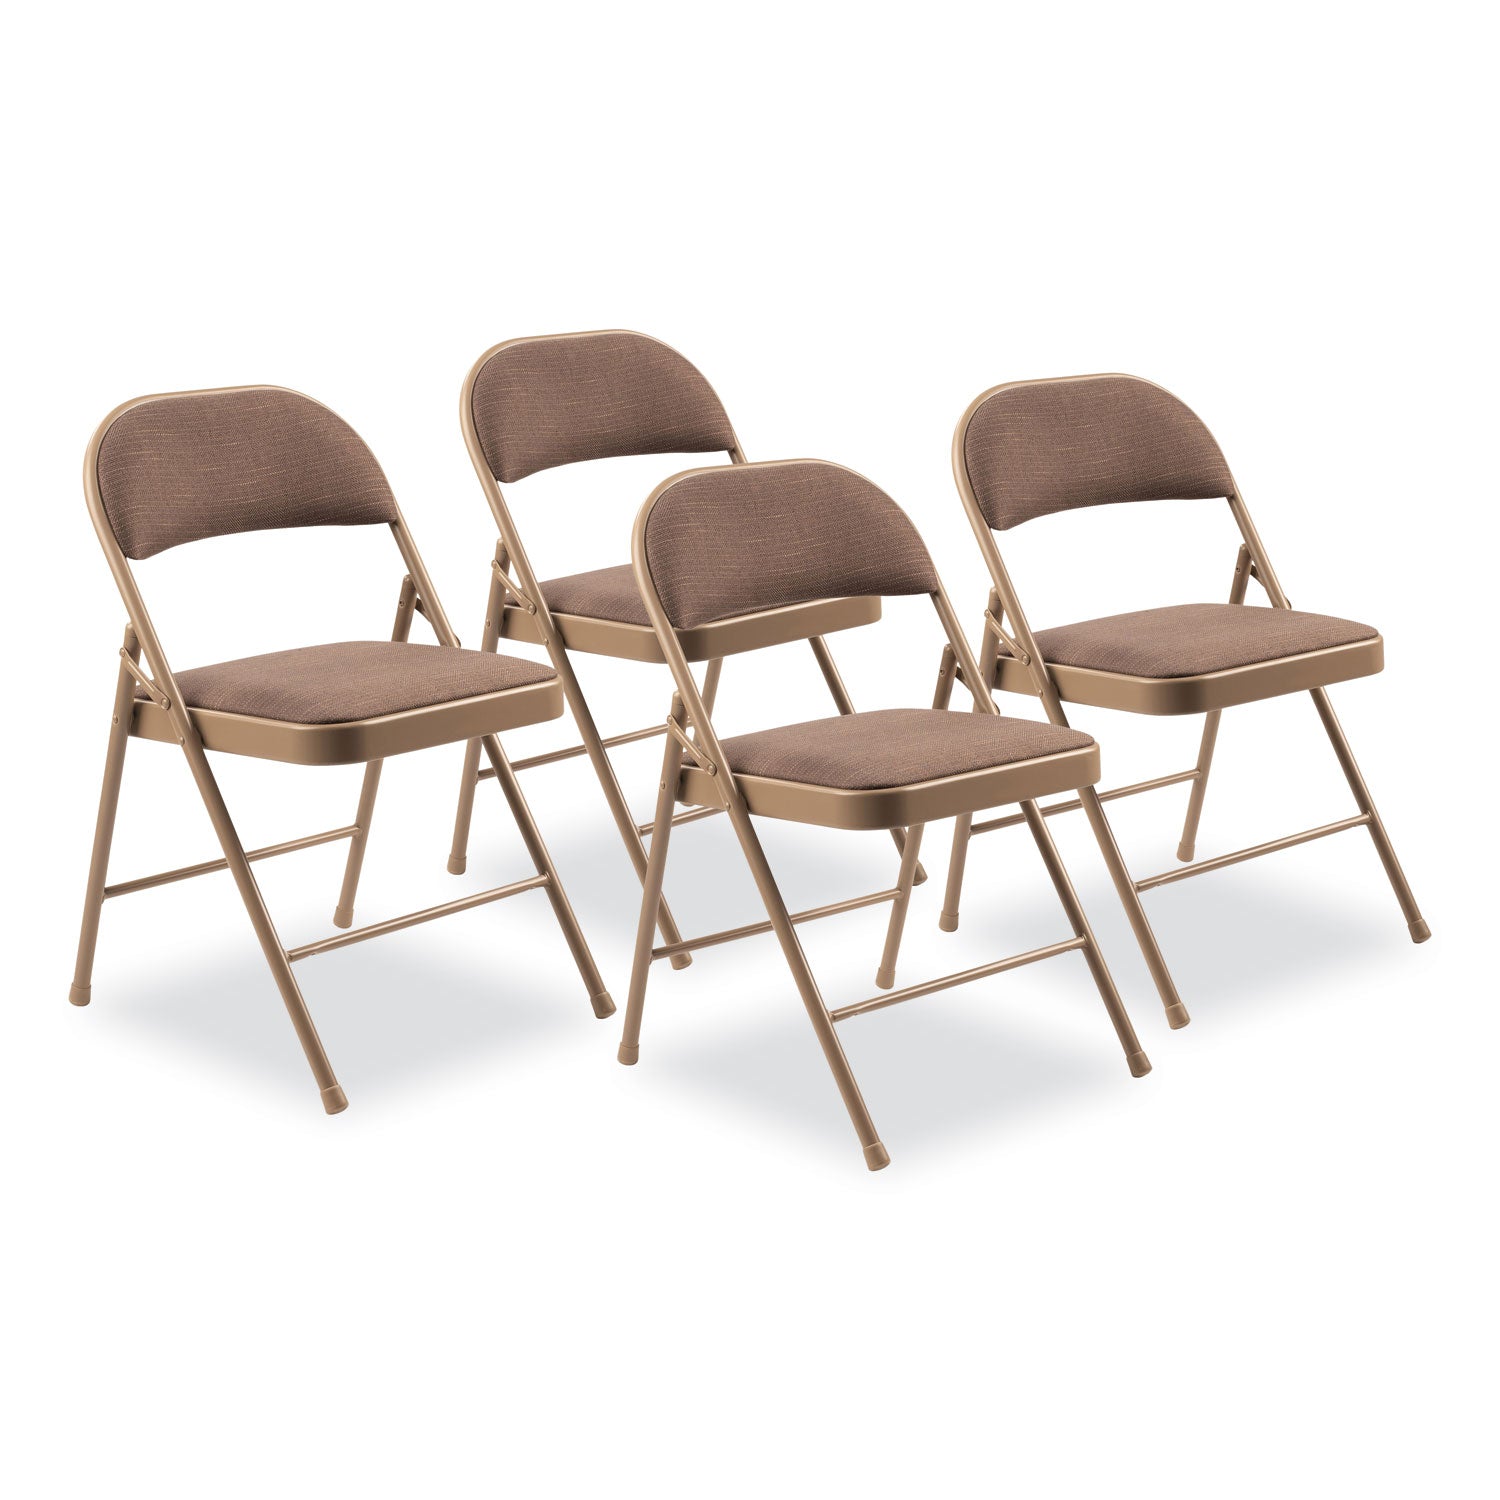 970-series-fabric-padded-steel-folding-chair-supports-250-lb-1775-seat-ht-star-trail-brown-4-ct-ships-in-1-3-bus-days_nps973 - 1